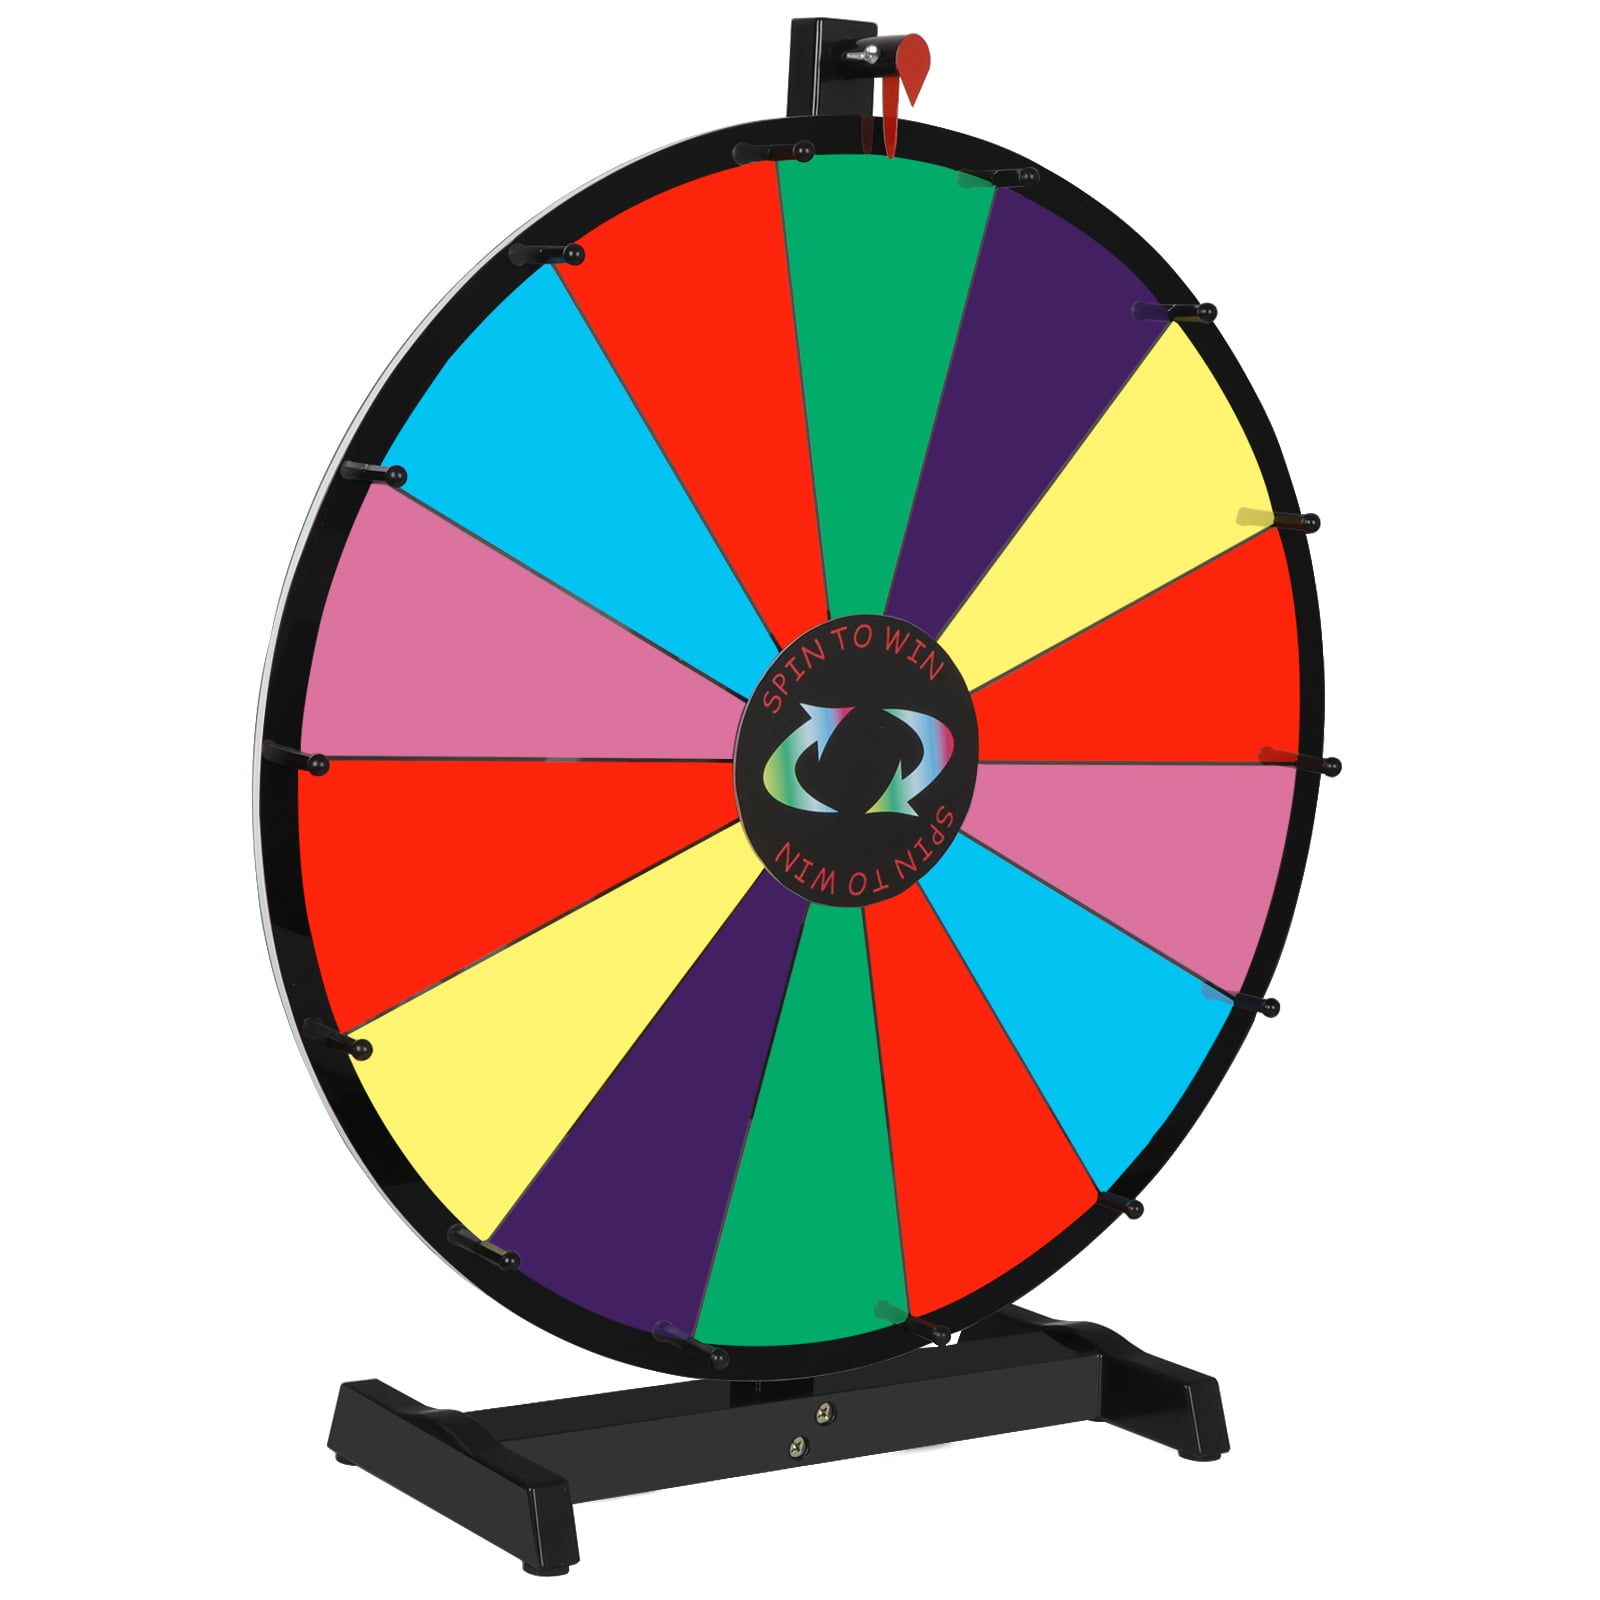 18" Tabletop Editable Dry Erase Color Prize Wheel 14 Slot Fortune Spinning Game 